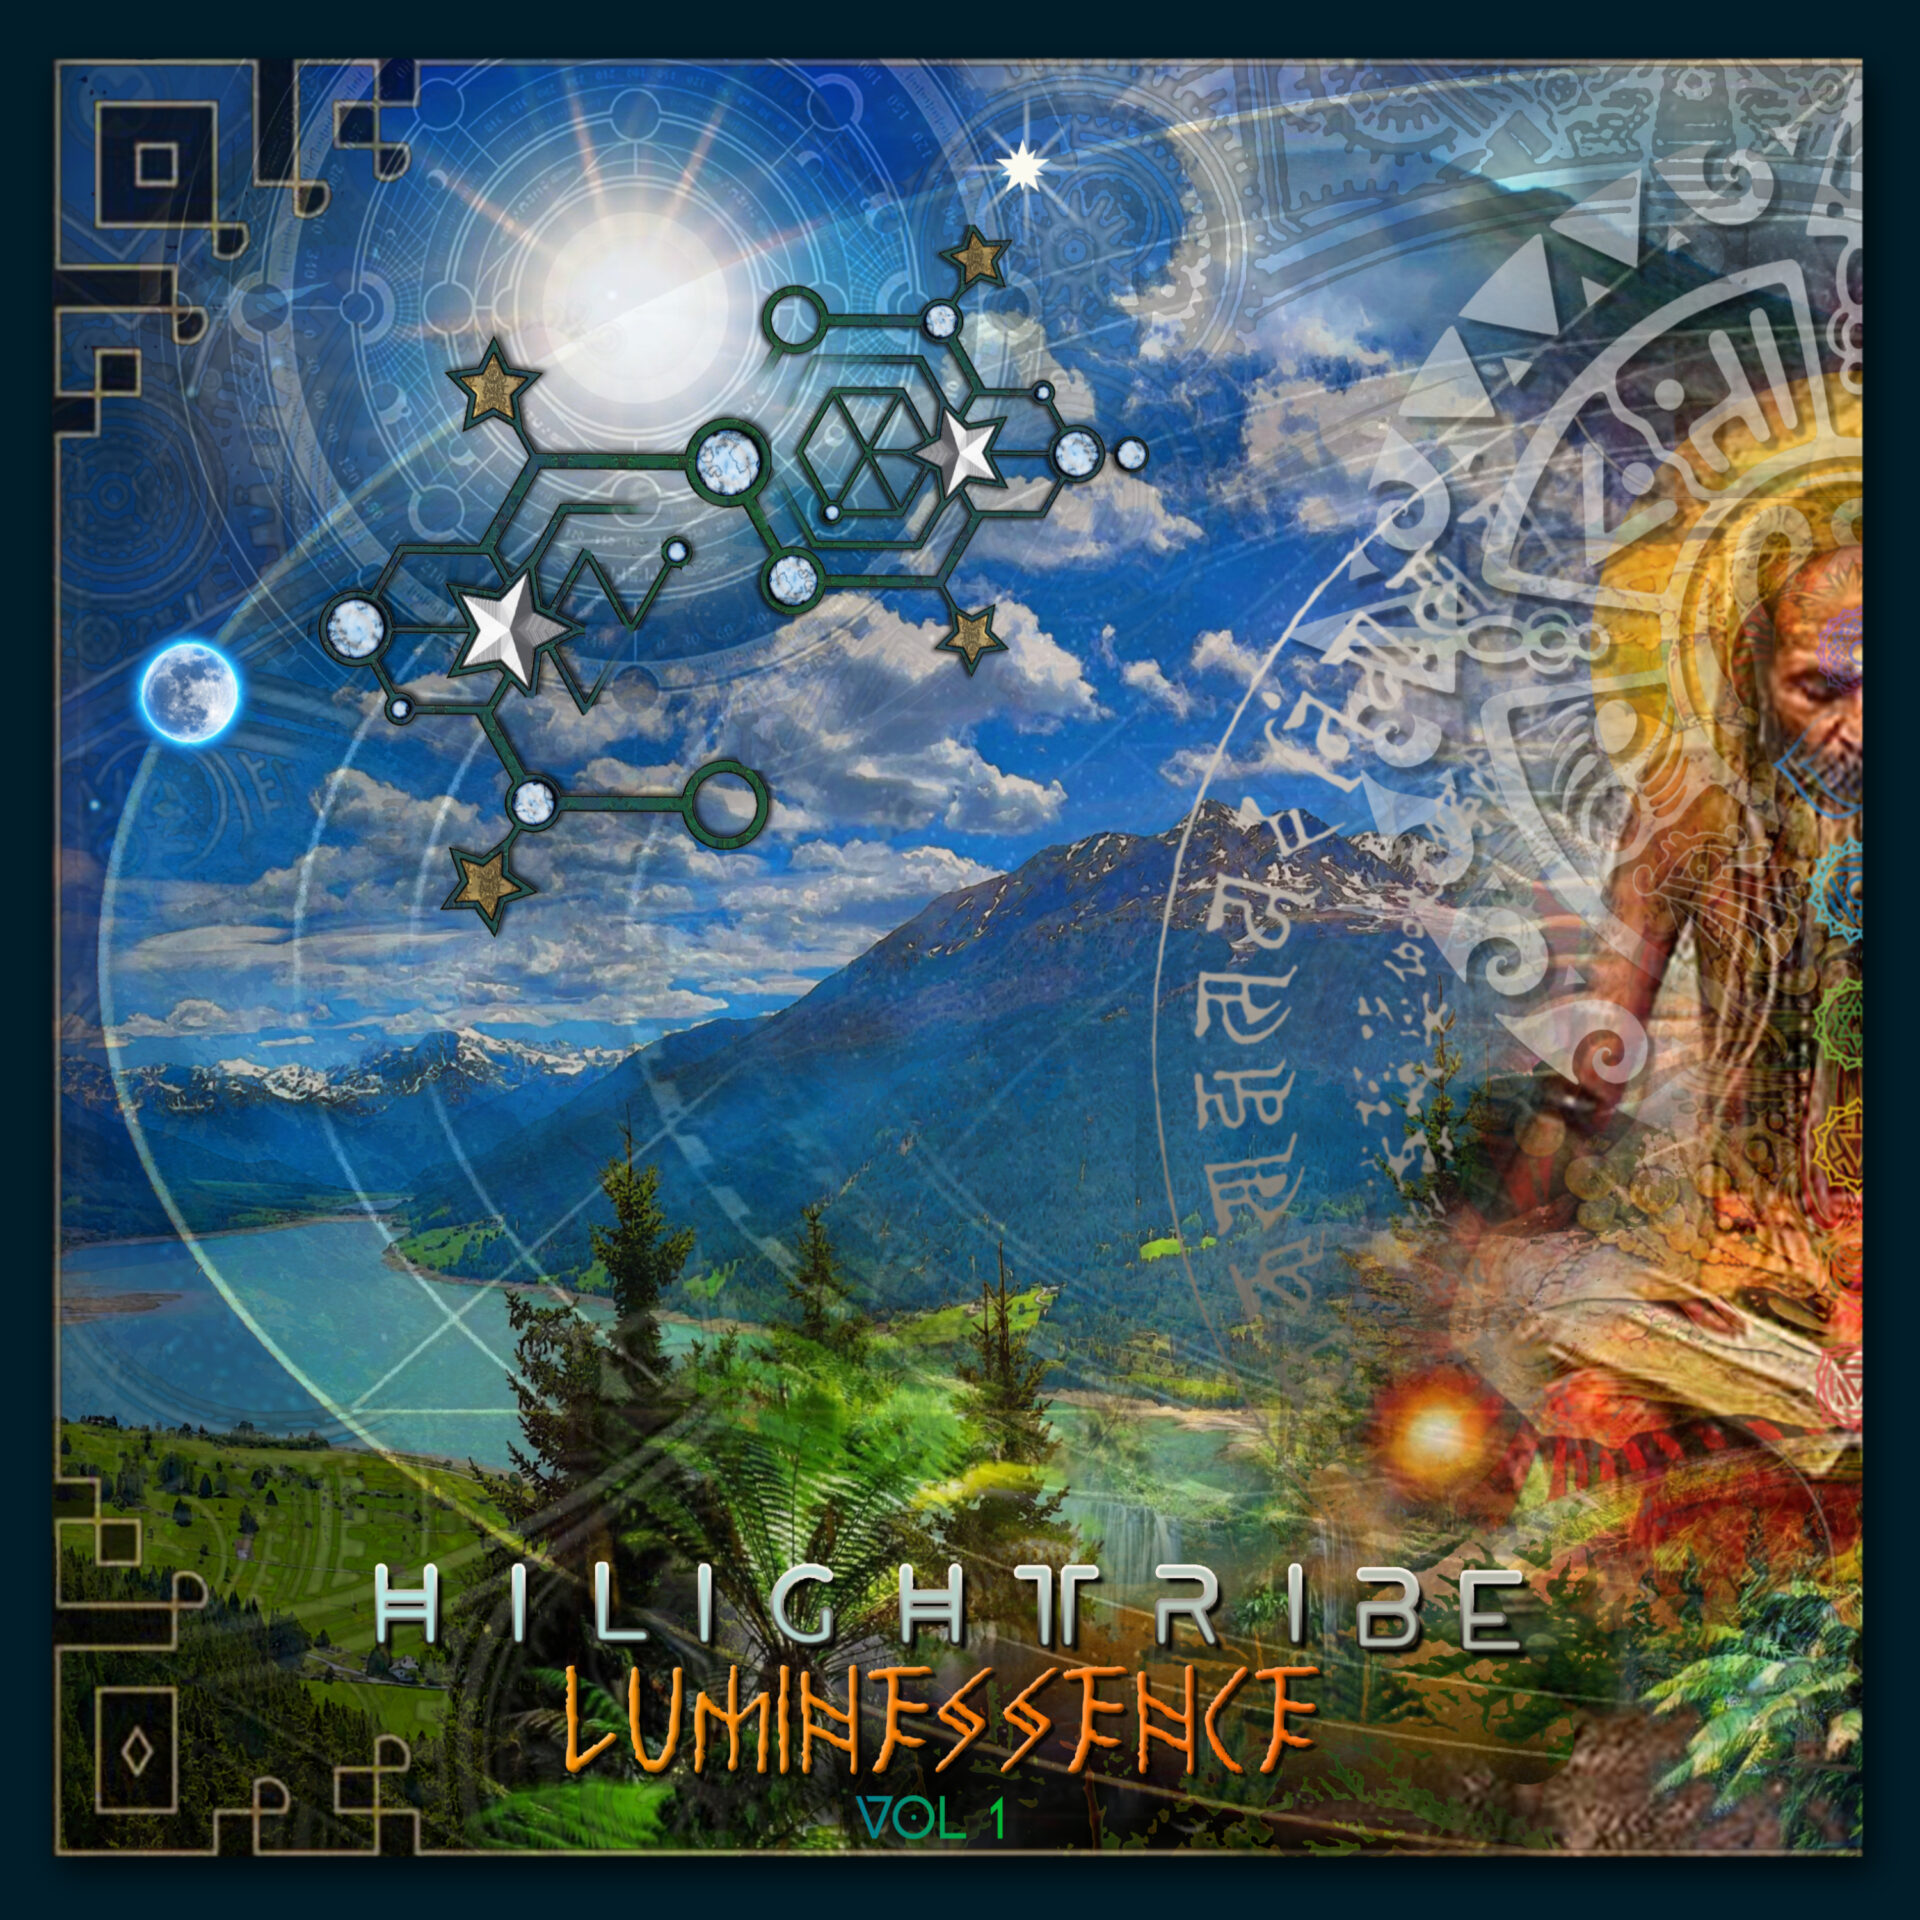 Hilight Tribe Releases “Luminessence vol1”: A Universal Message for All Peoples